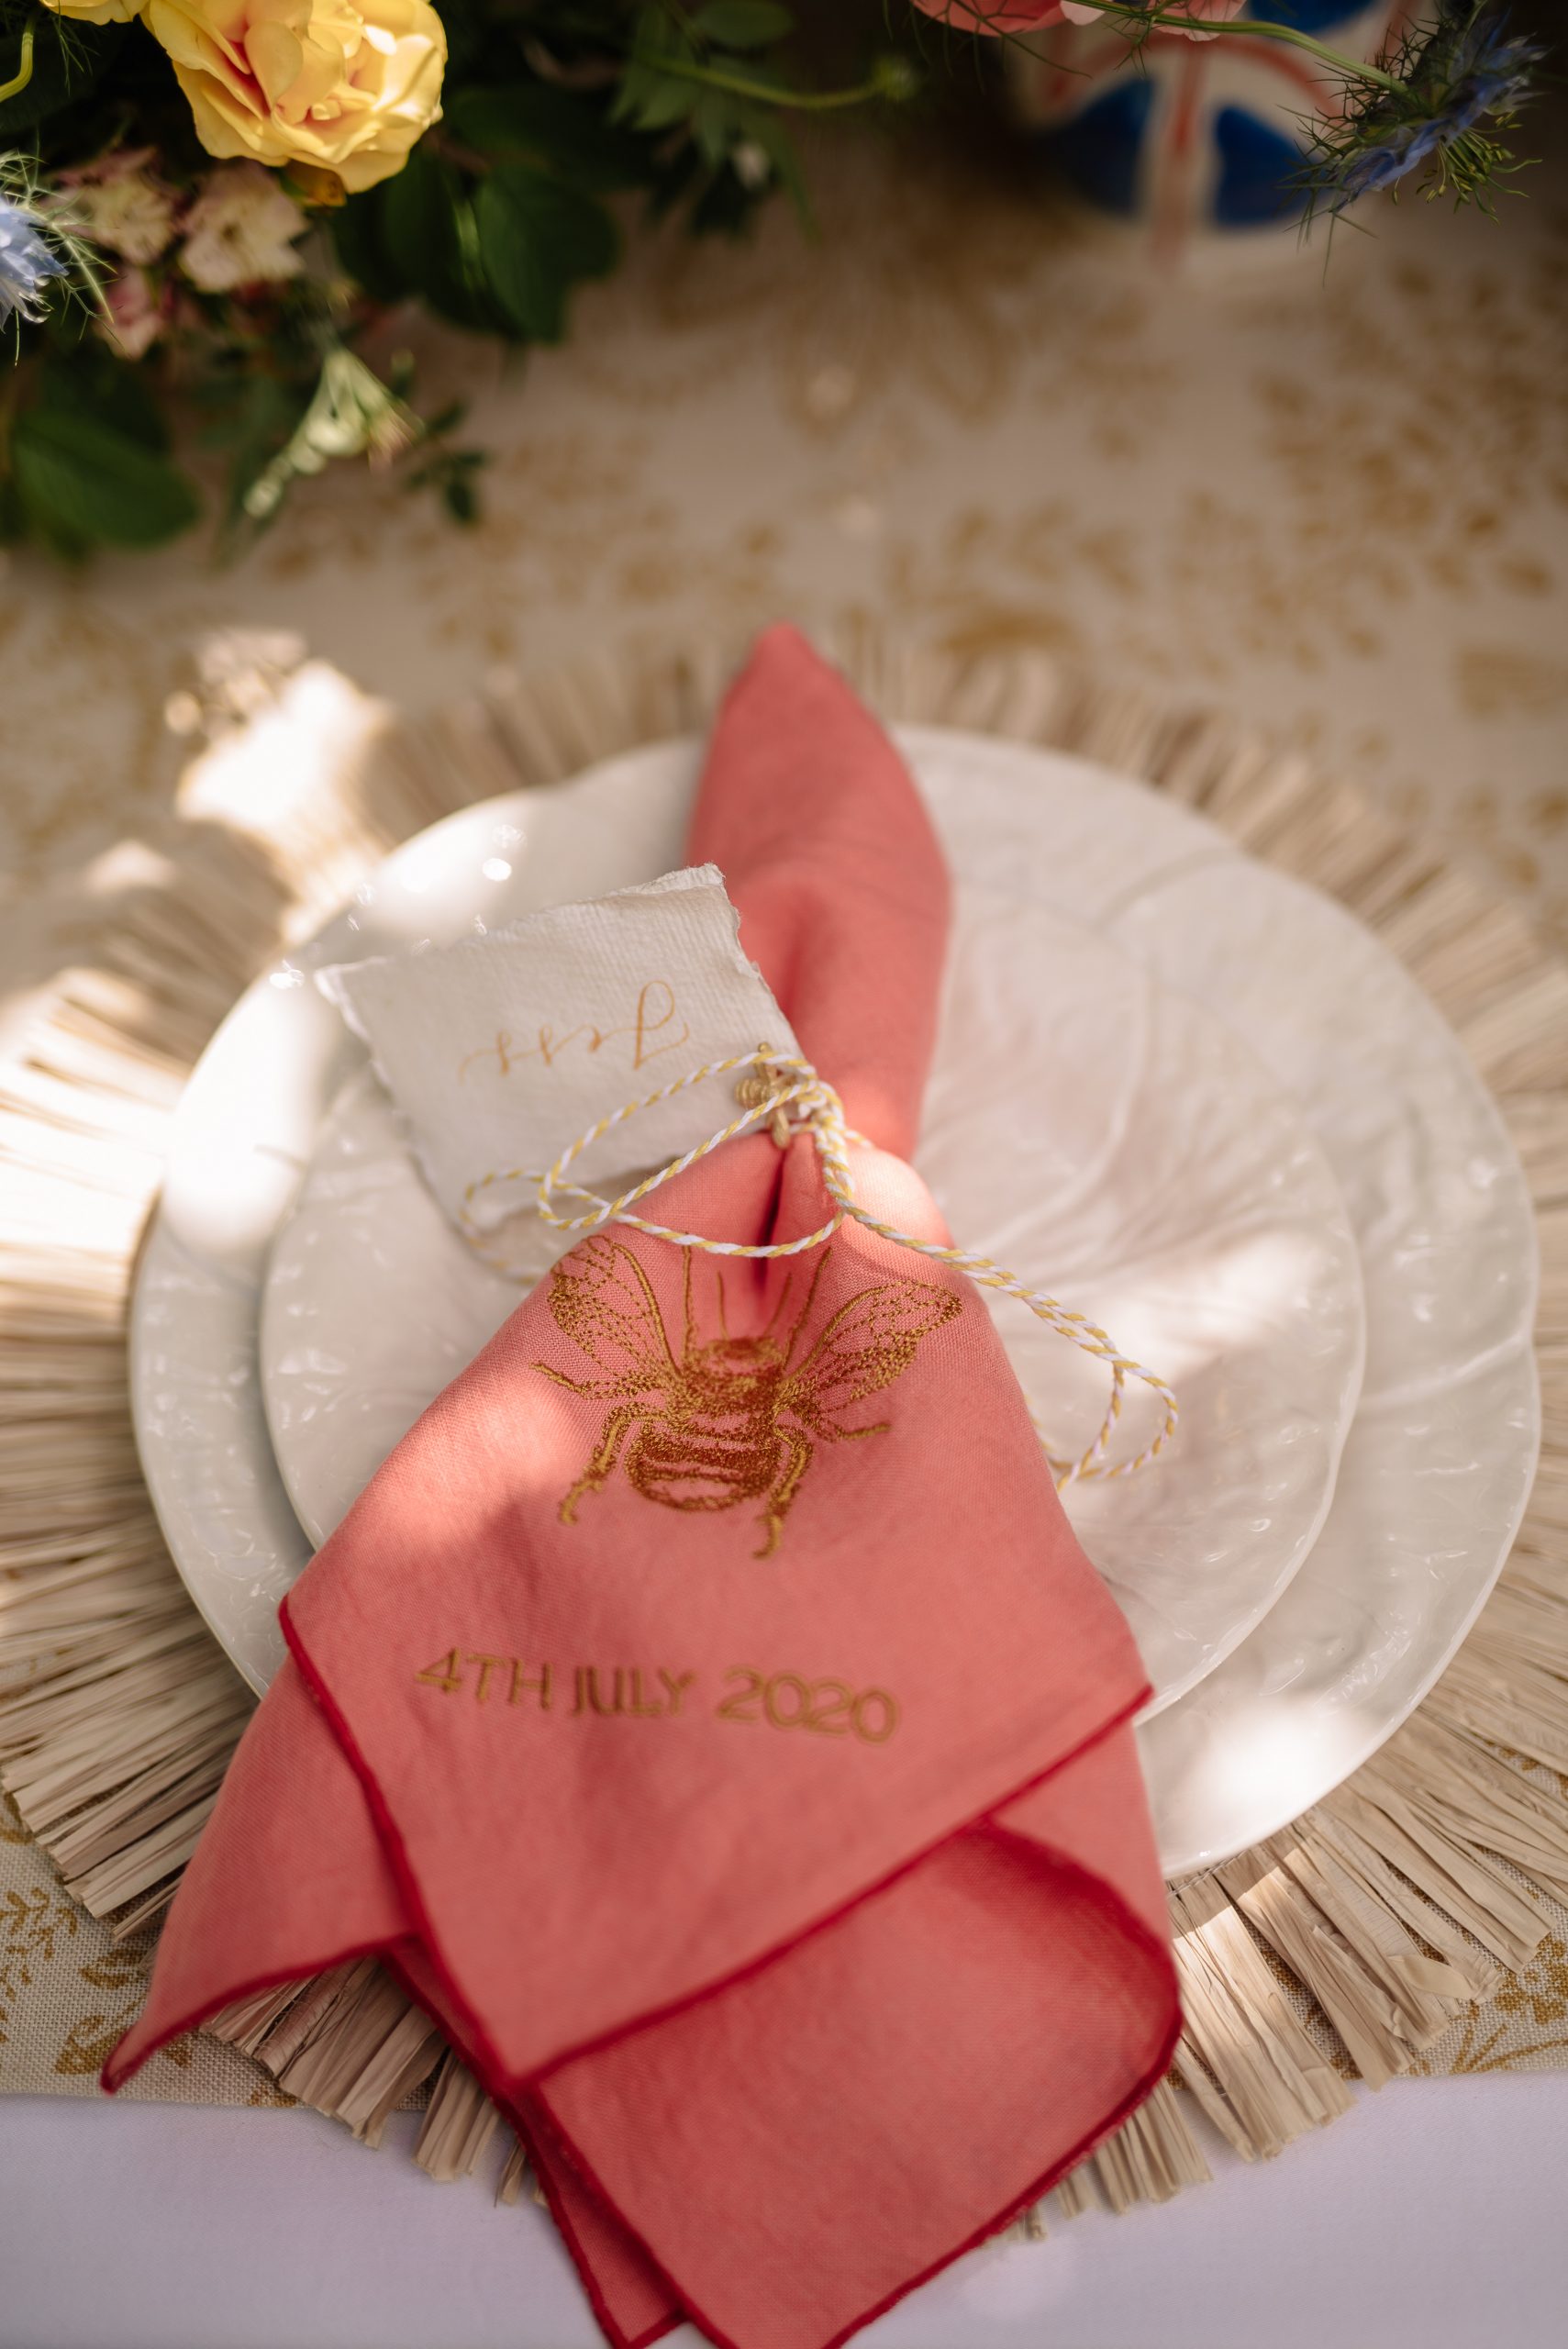 Personalised Pink Napkins For A Garden Party Naming Ceremony